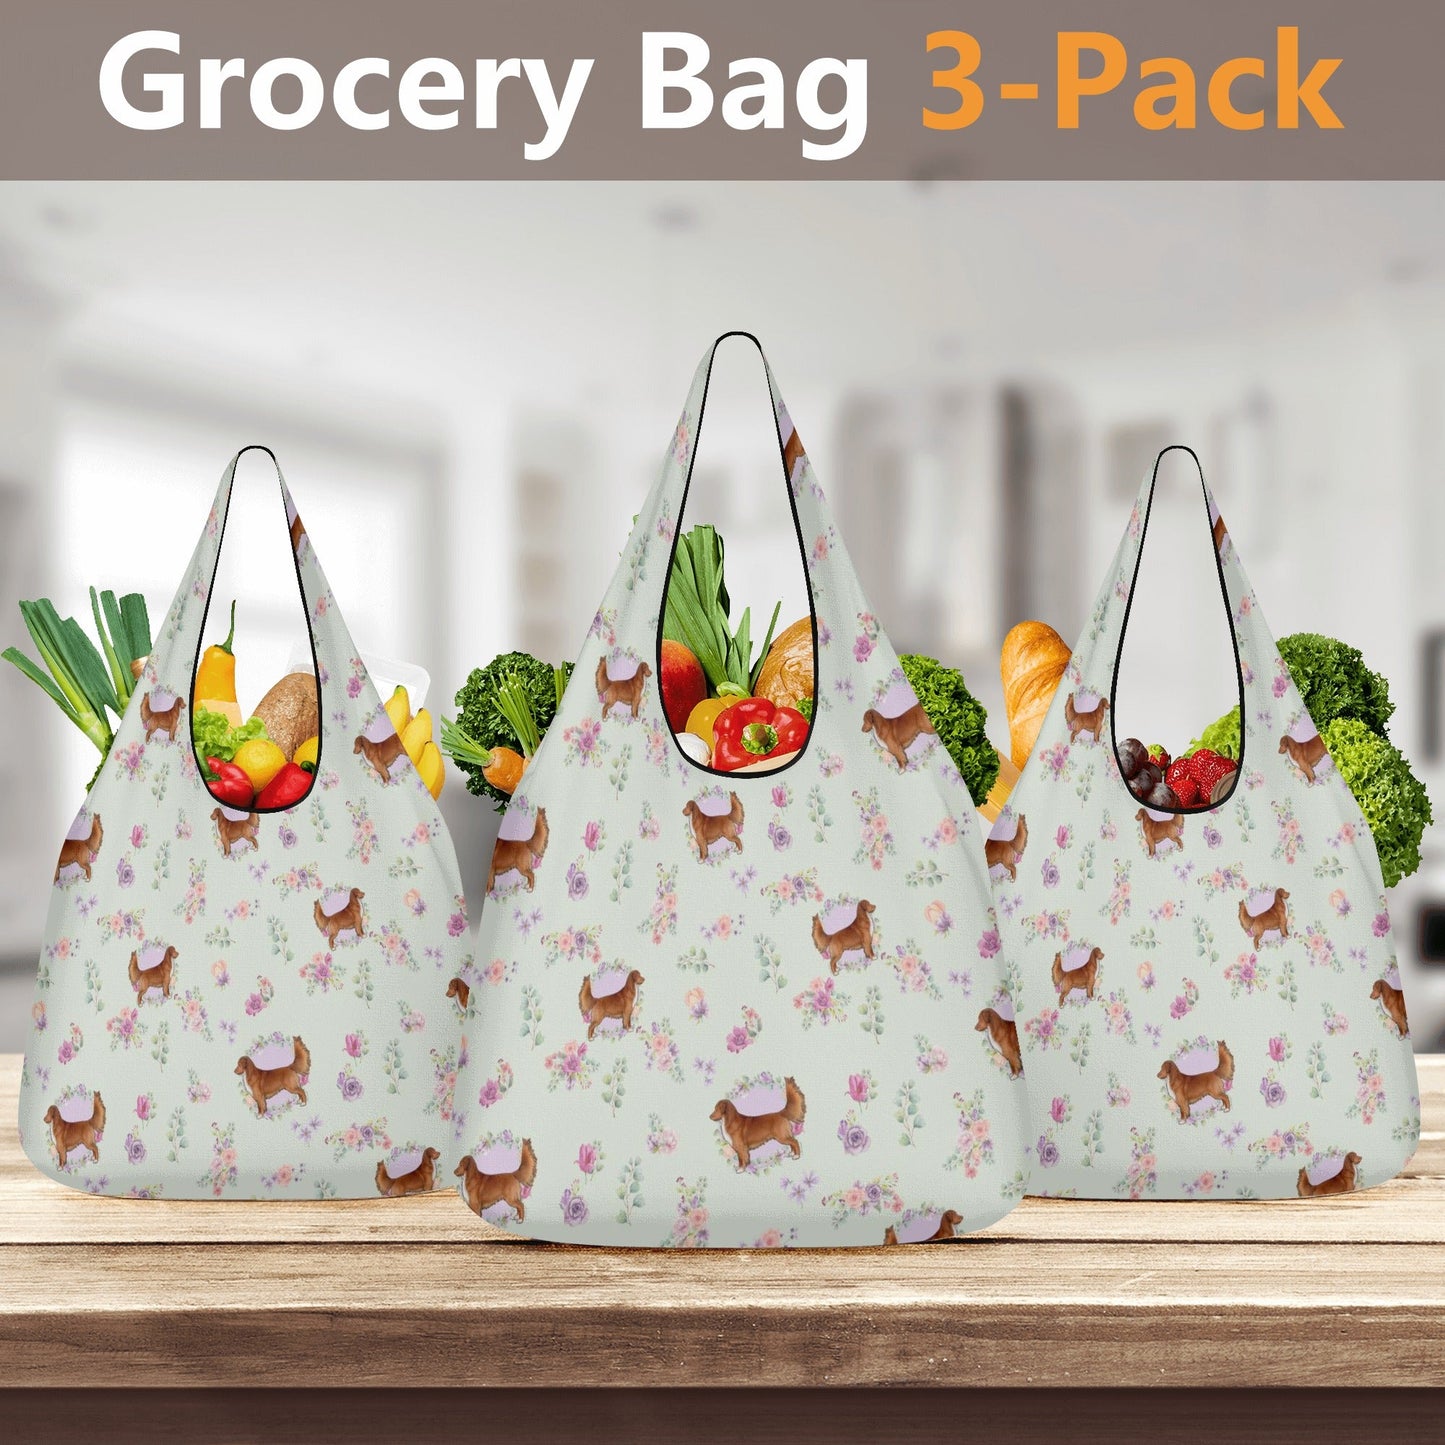 3-Pack of Economy Bags (great for puppy go home bags!)